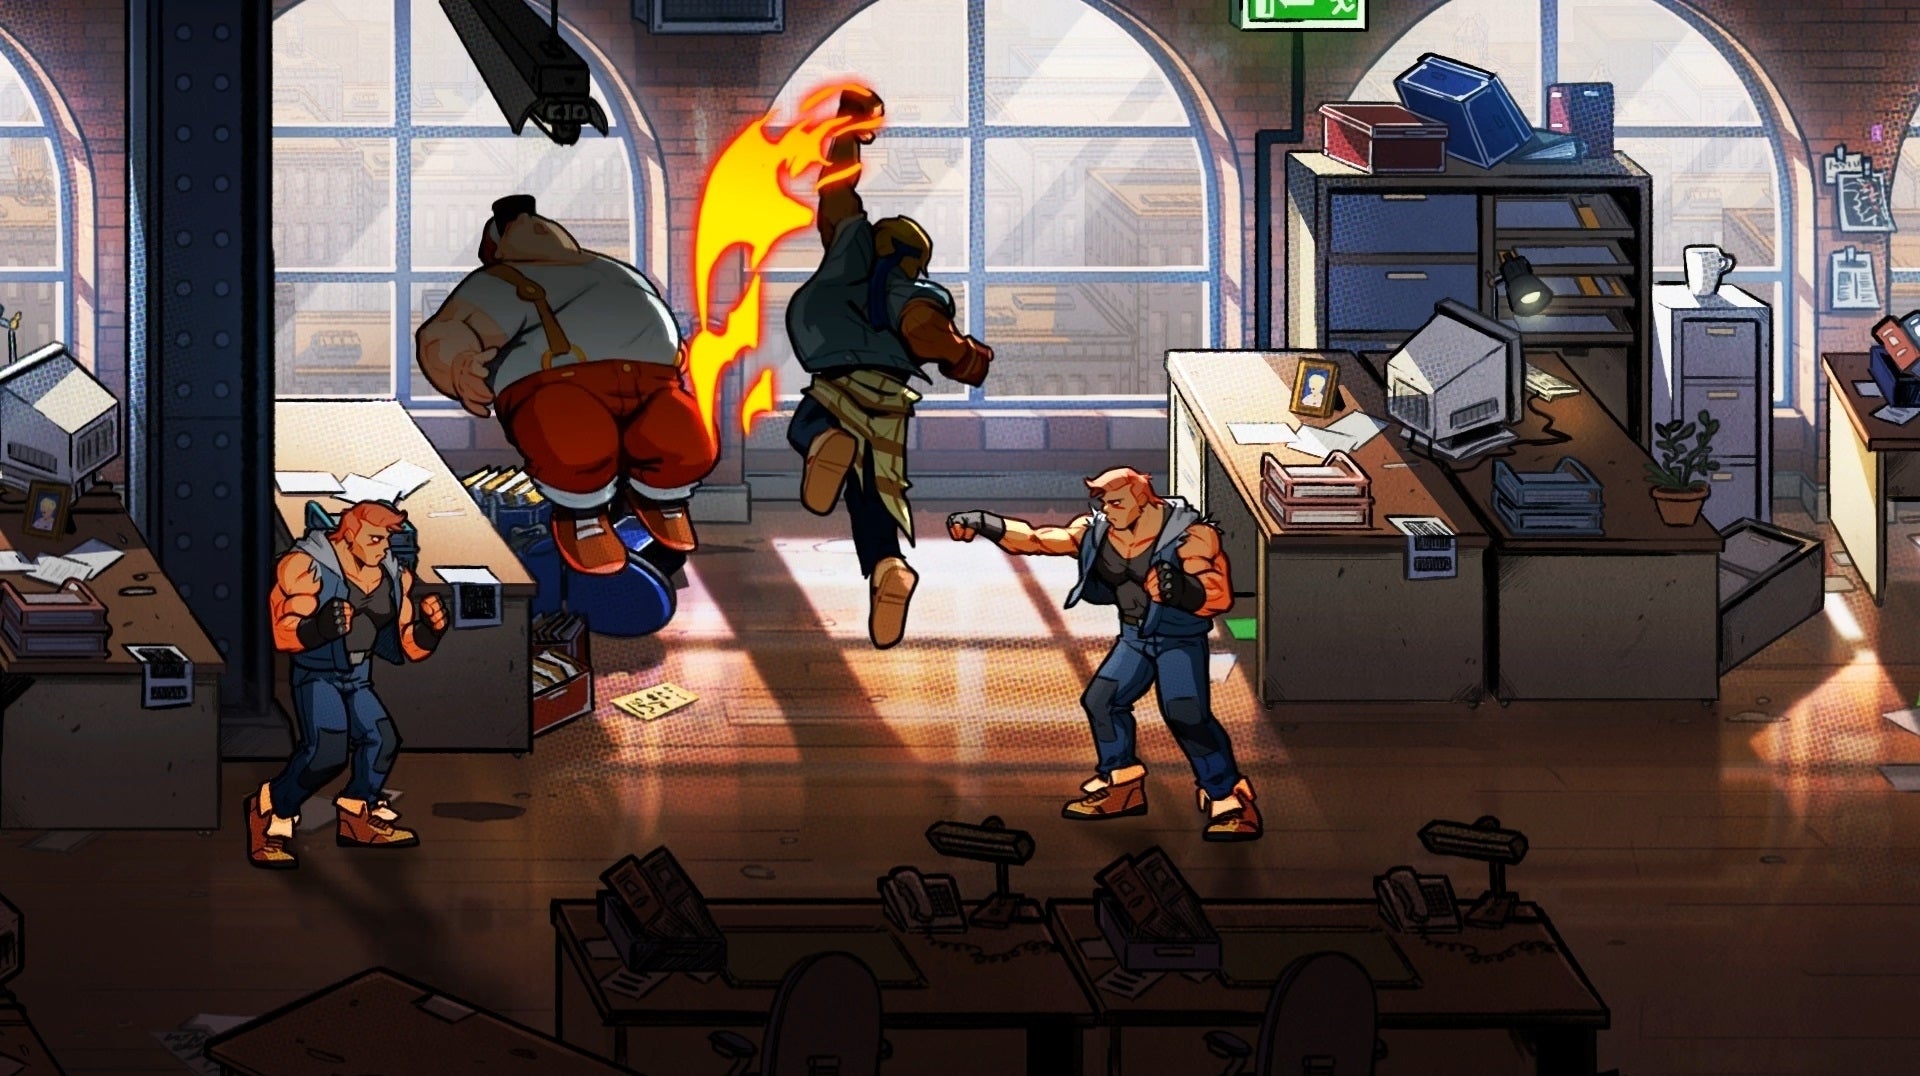 Image for First Streets of Rage 4 gameplay trailer shows off fiery fists of fury